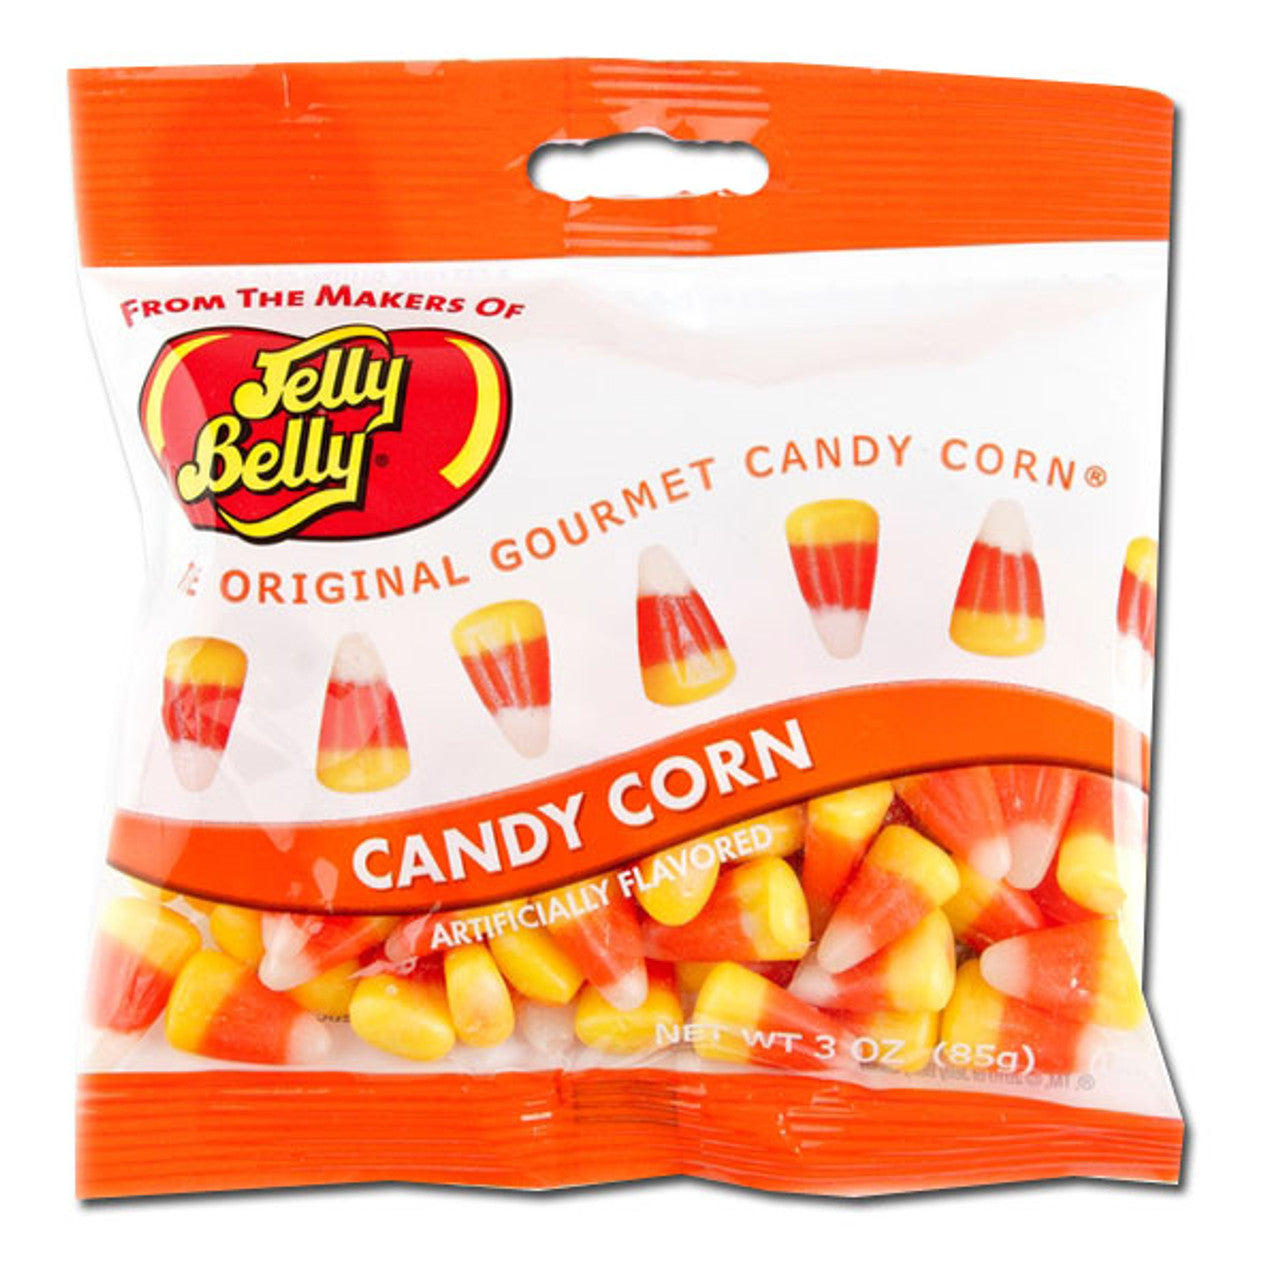 Jelly Belly Candy Corn Bag 3oz - 12ct